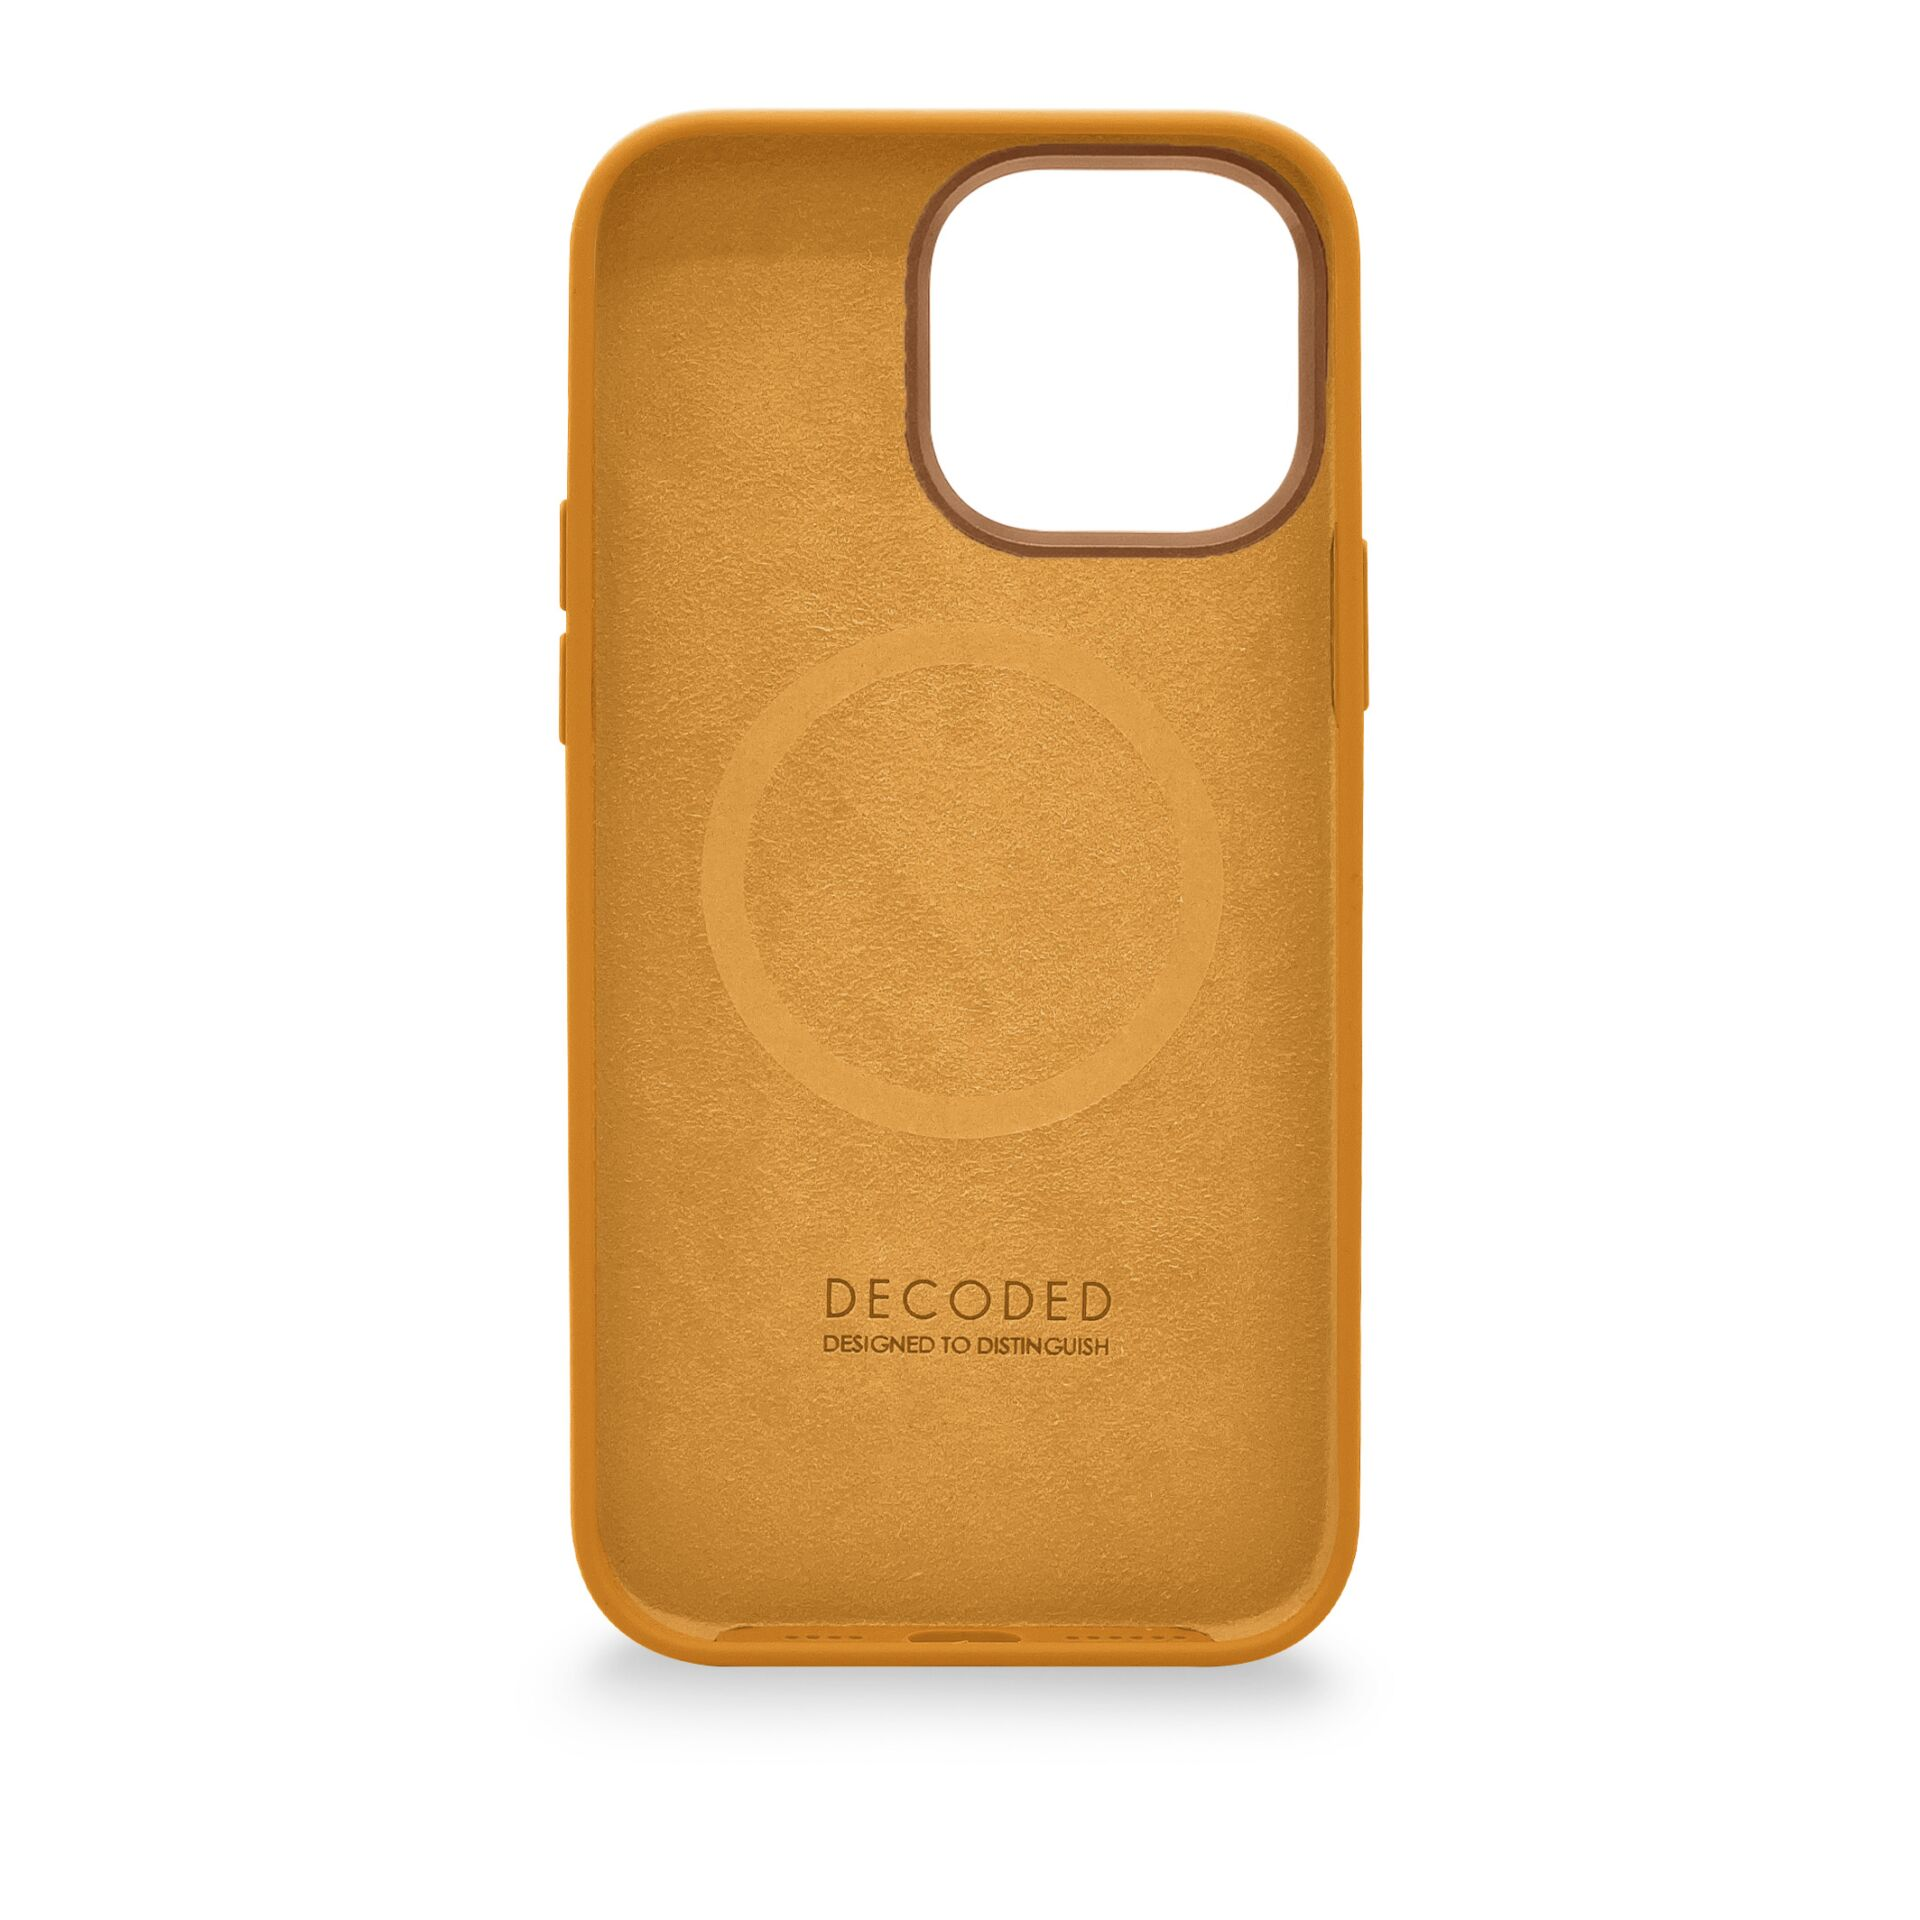 Backcover, Apricot, Pro, Backcover Apricot 14 iPhone Apple, DECODED Silicone AntiMicrobial